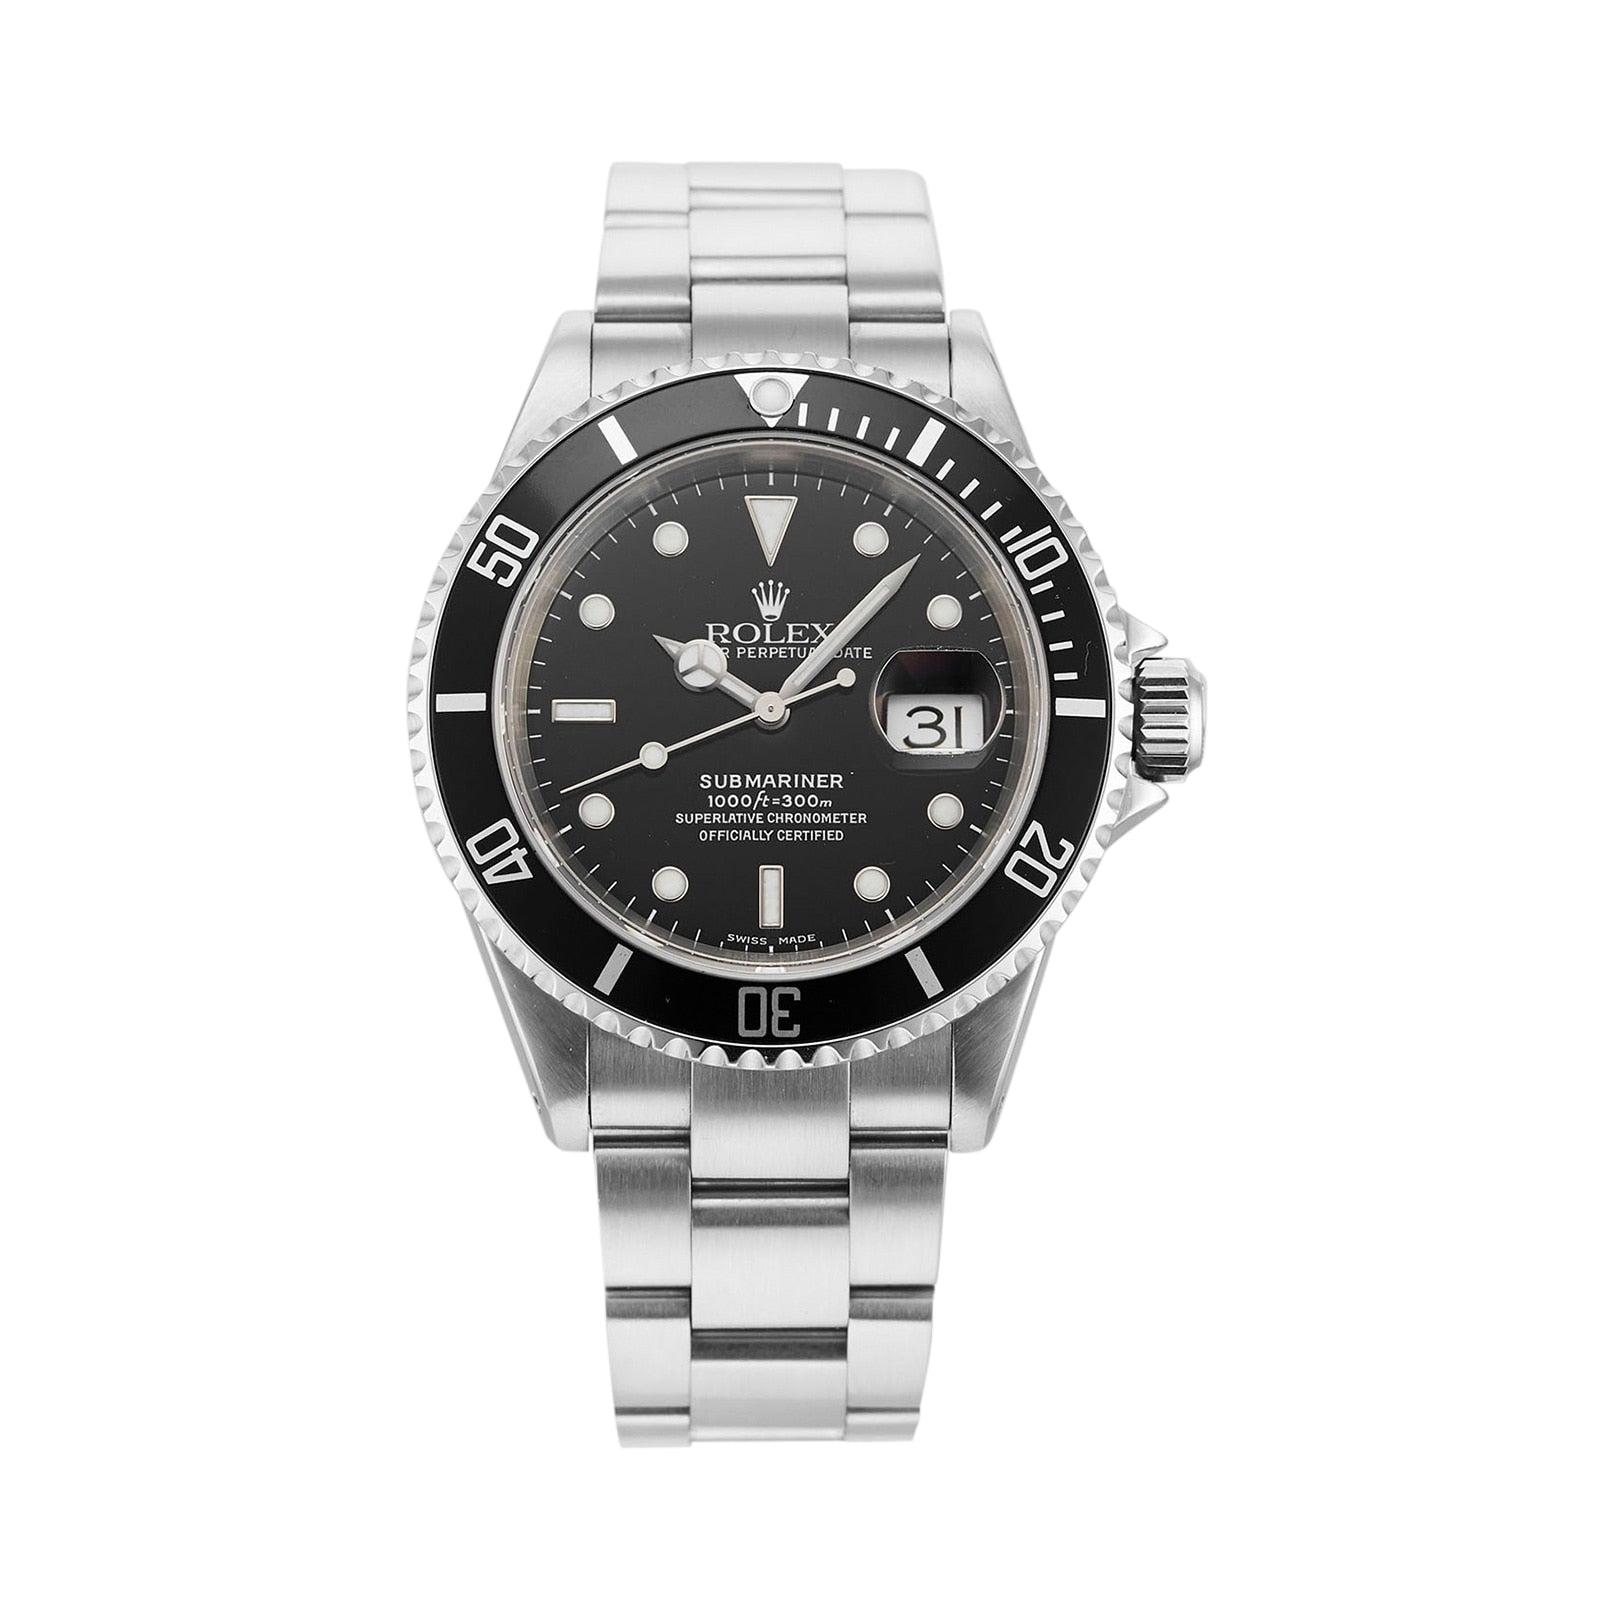 Rolex Submariner Date - 16610LN (Pre-Owned)